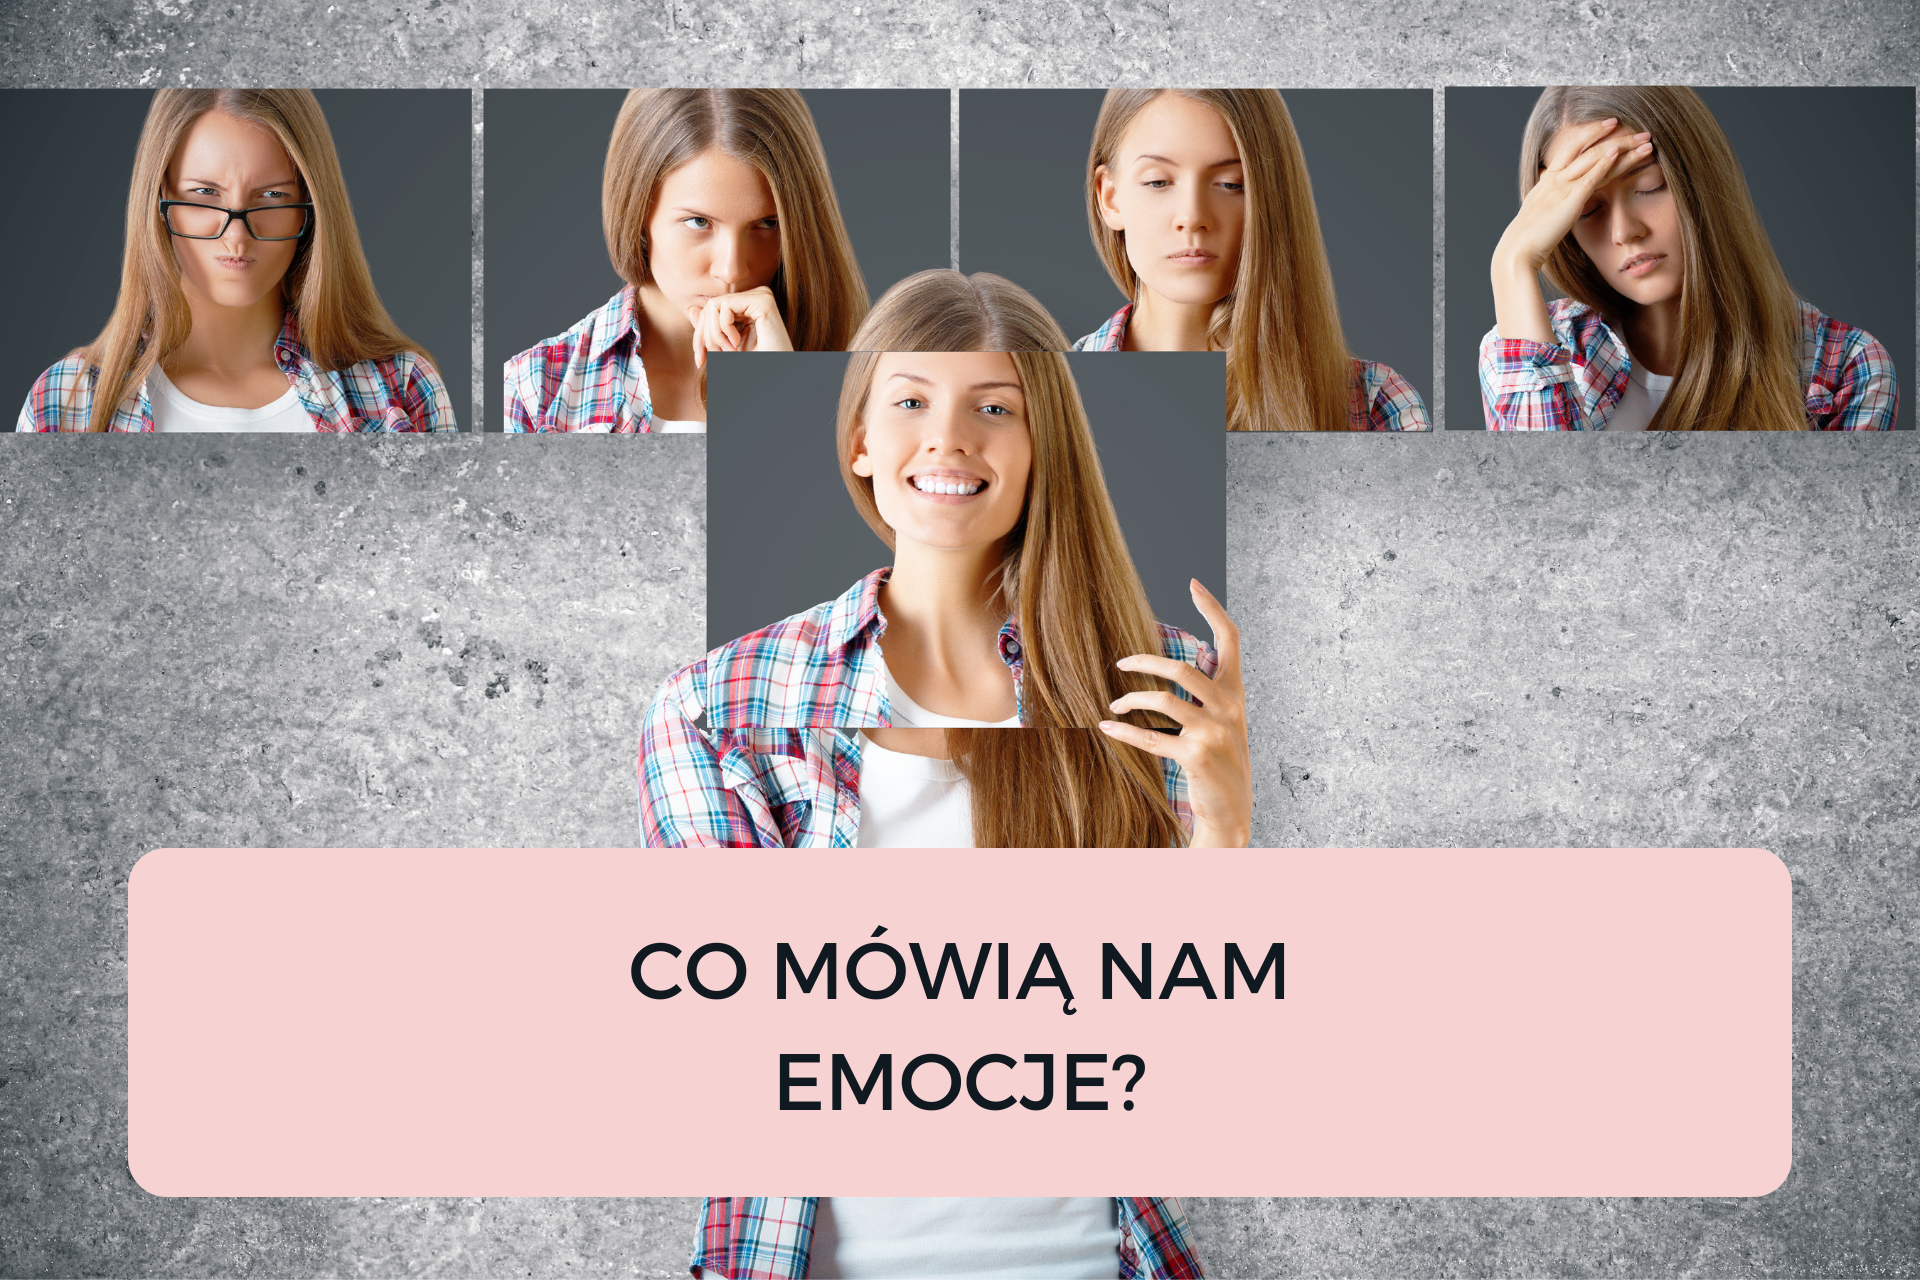 You are currently viewing CO MÓWIĄ NAM EMOCJE?